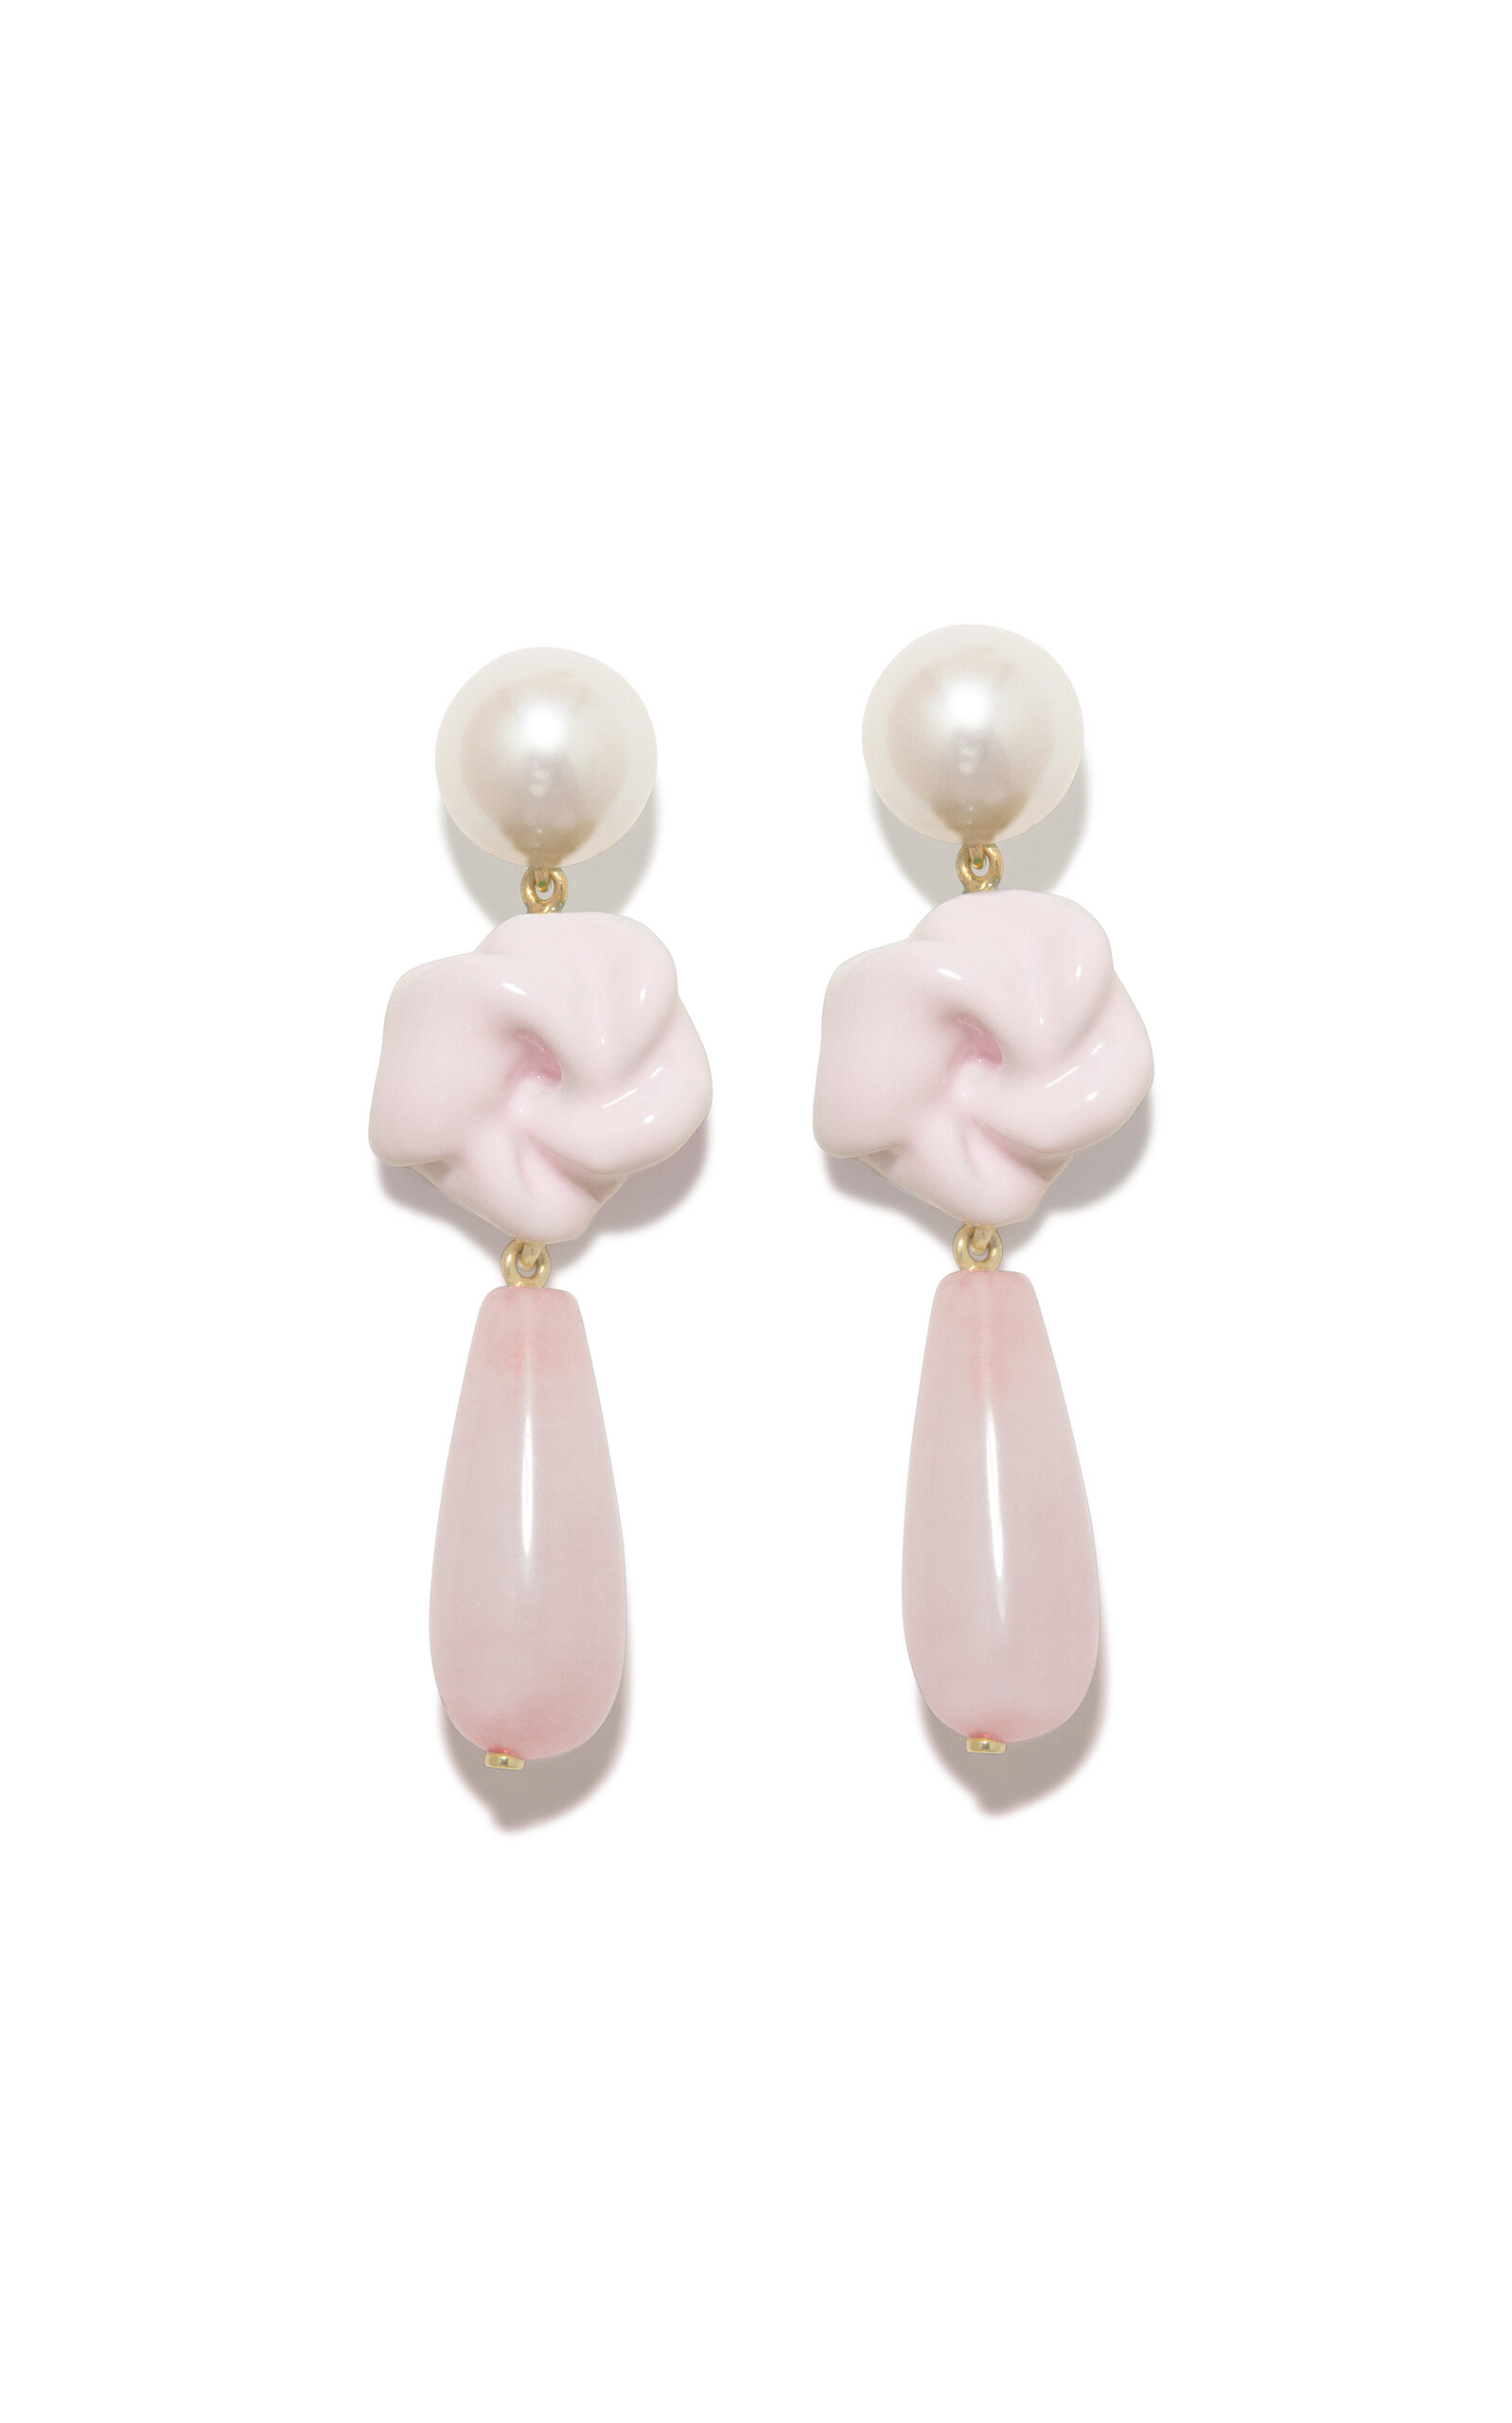 The Depths of Time Enamel; Rose Quartz and Pearl Drop Earrings